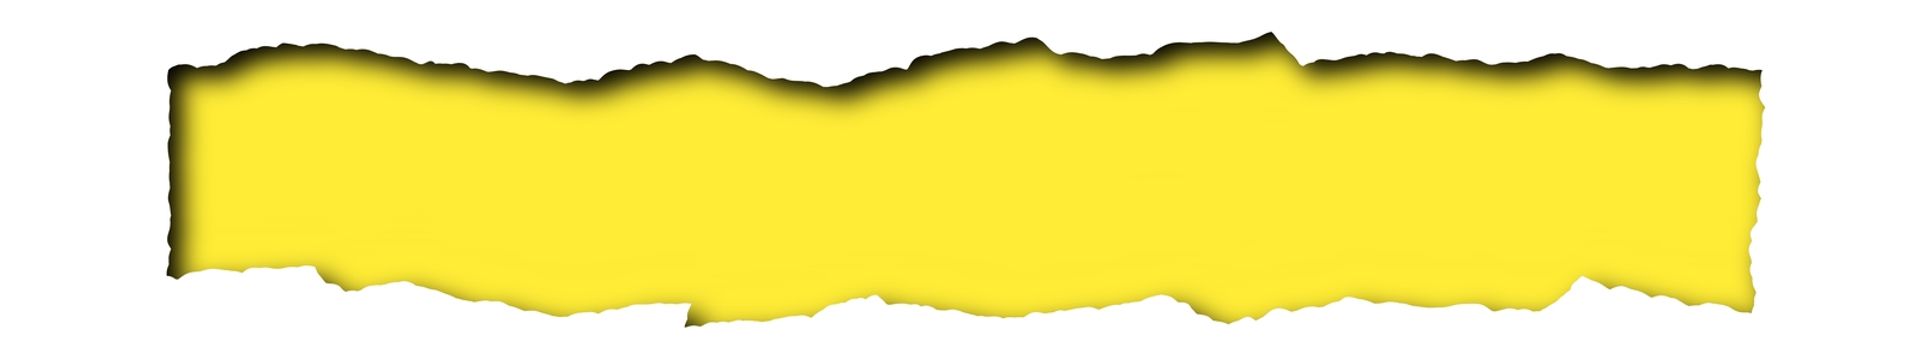 Torn paper with yellow space for text isolated on a white background 